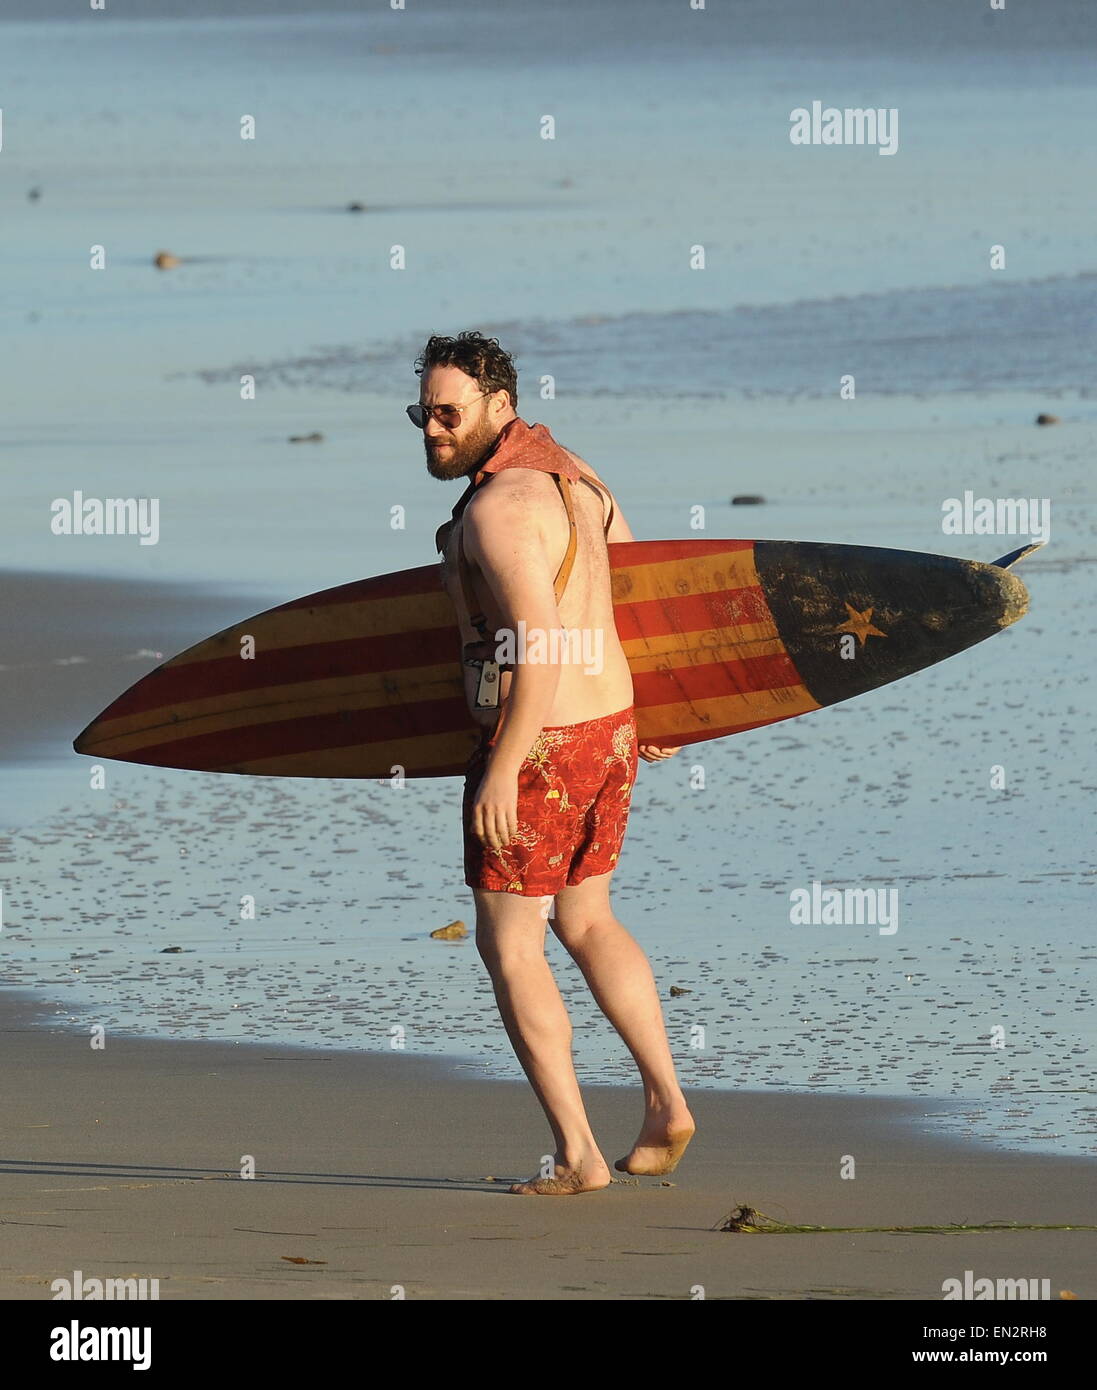 Actor Seth Rogen is lock and loaded on the beach and ready to surf for the new movie "Zeroville" filming in Malibu Ca. The comedian was seen holding a surf board and 2 guns in their holsters with swimming trunks while filming a sunset scene on the beach. The new movie is also produced and directed by his good pal James Franco.  Featuring: Seth Rogen Where: Malibu, California, United States When: 22 Oct 2014 Stock Photo